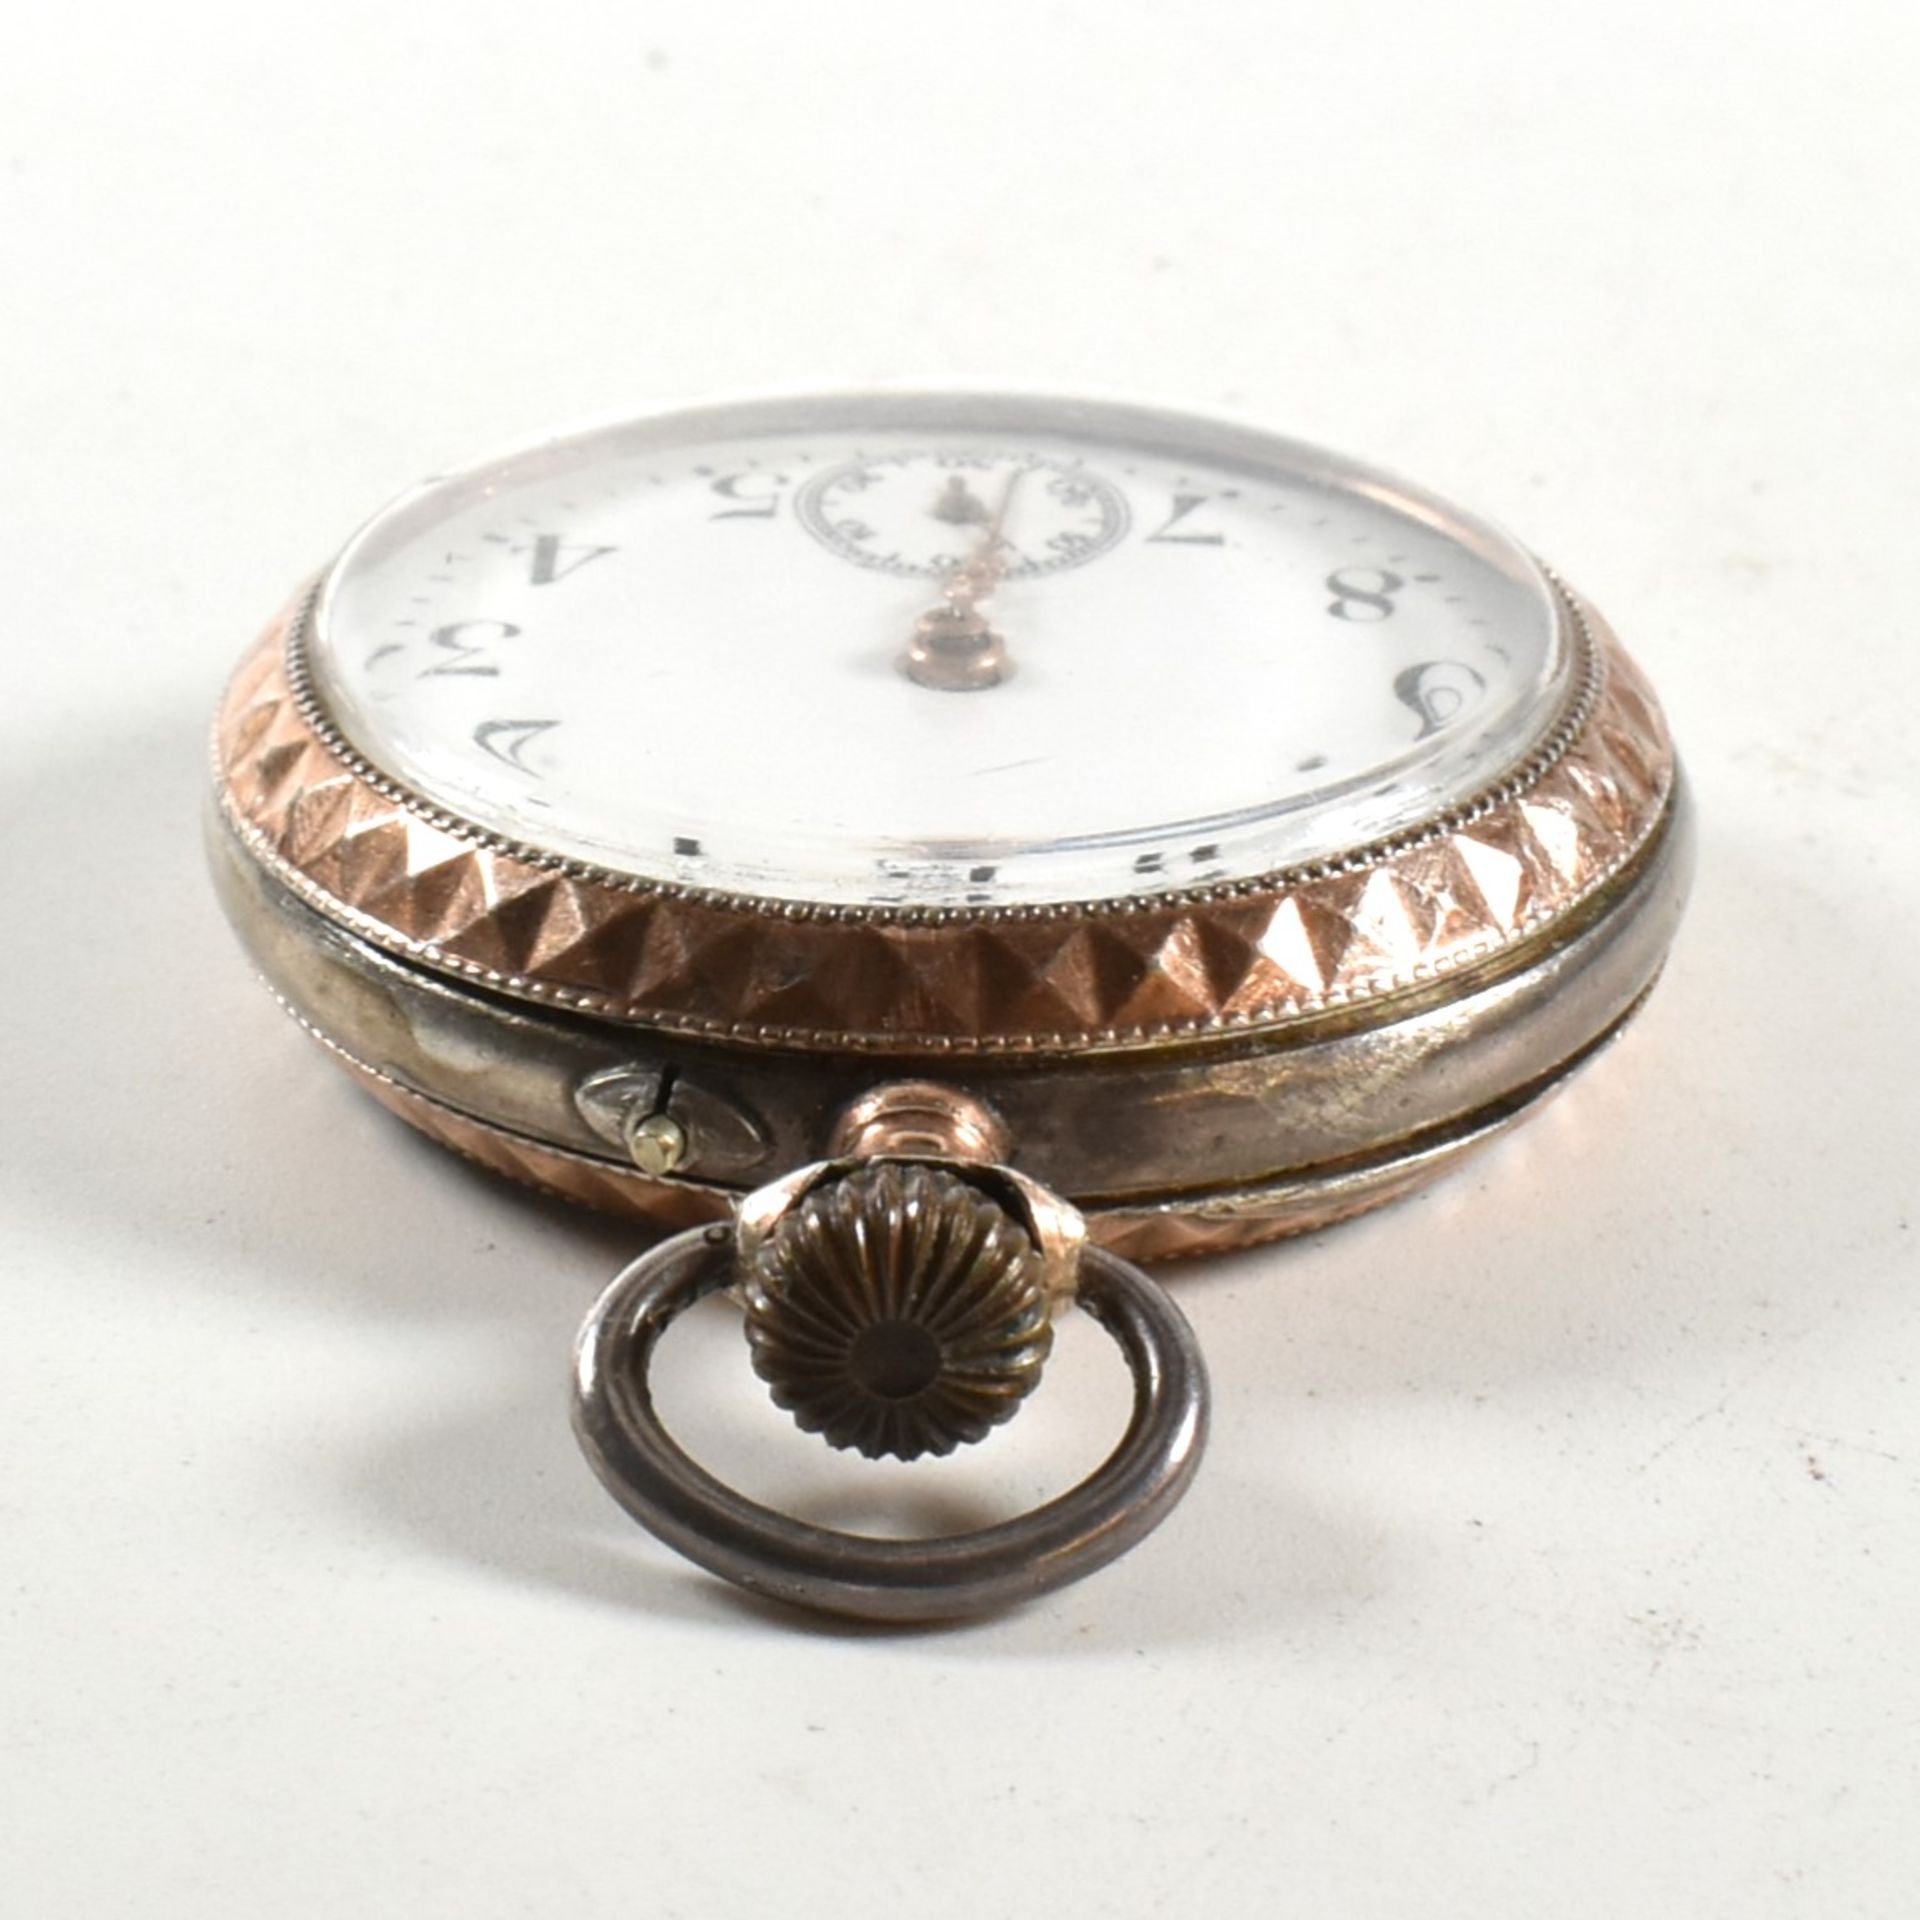 SILVER 800 CONTINENTAL OPEN FACED CROWN WIND POCKET WATCH - Image 6 of 8